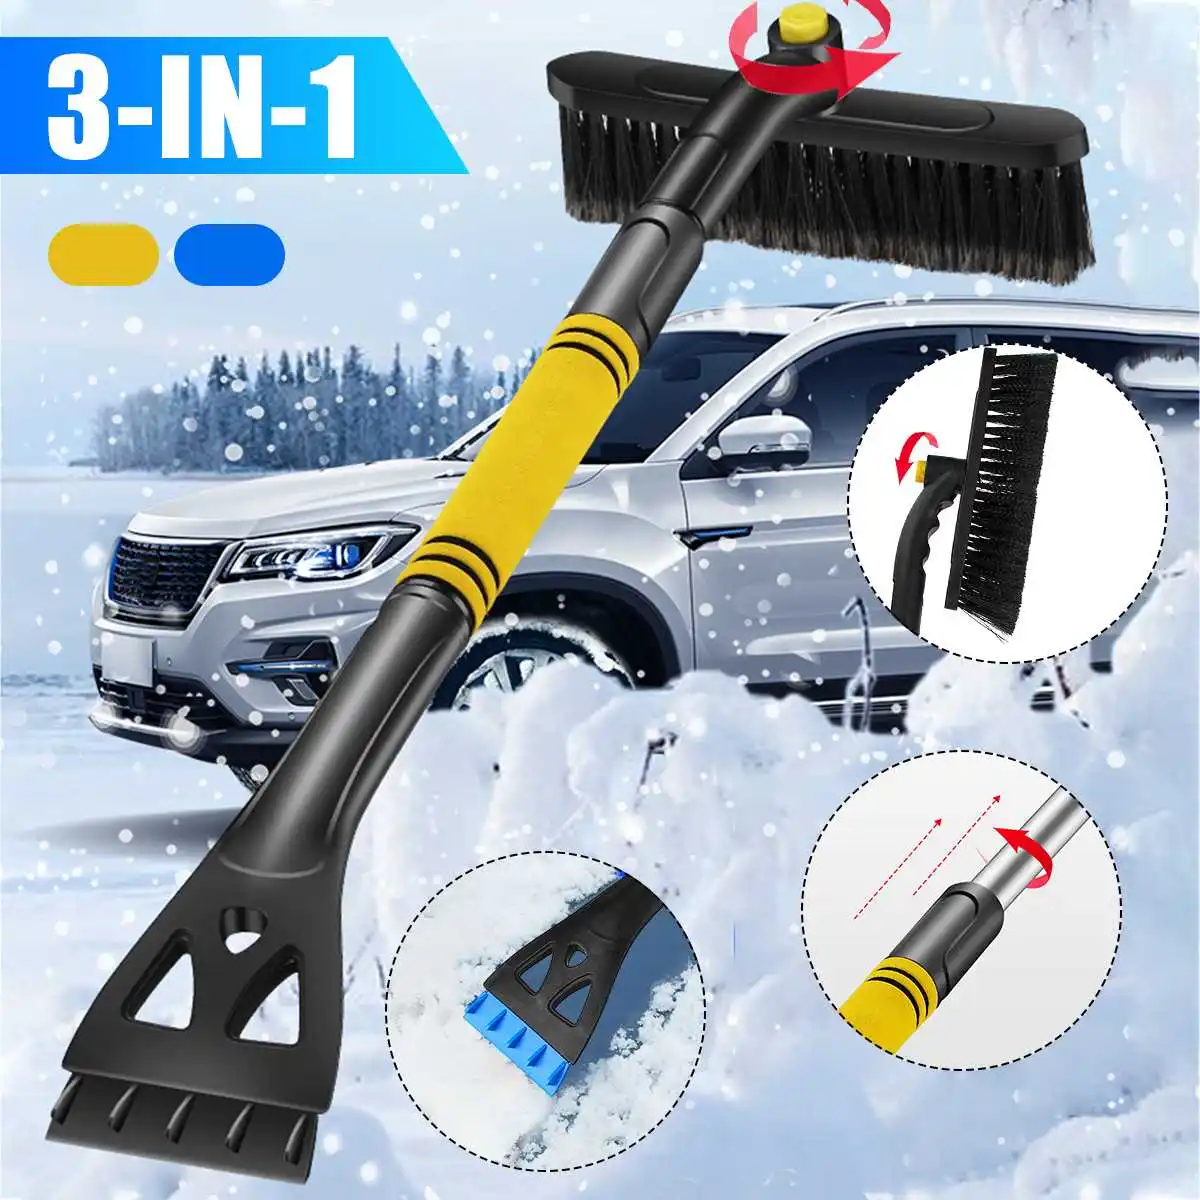 

64CM/80CM Car Ice Scraper Snow Defrost Shovel Winter Easy To Carry 3-IN-1 Car Snow Brush With 360 Degree Rotating Brush Head